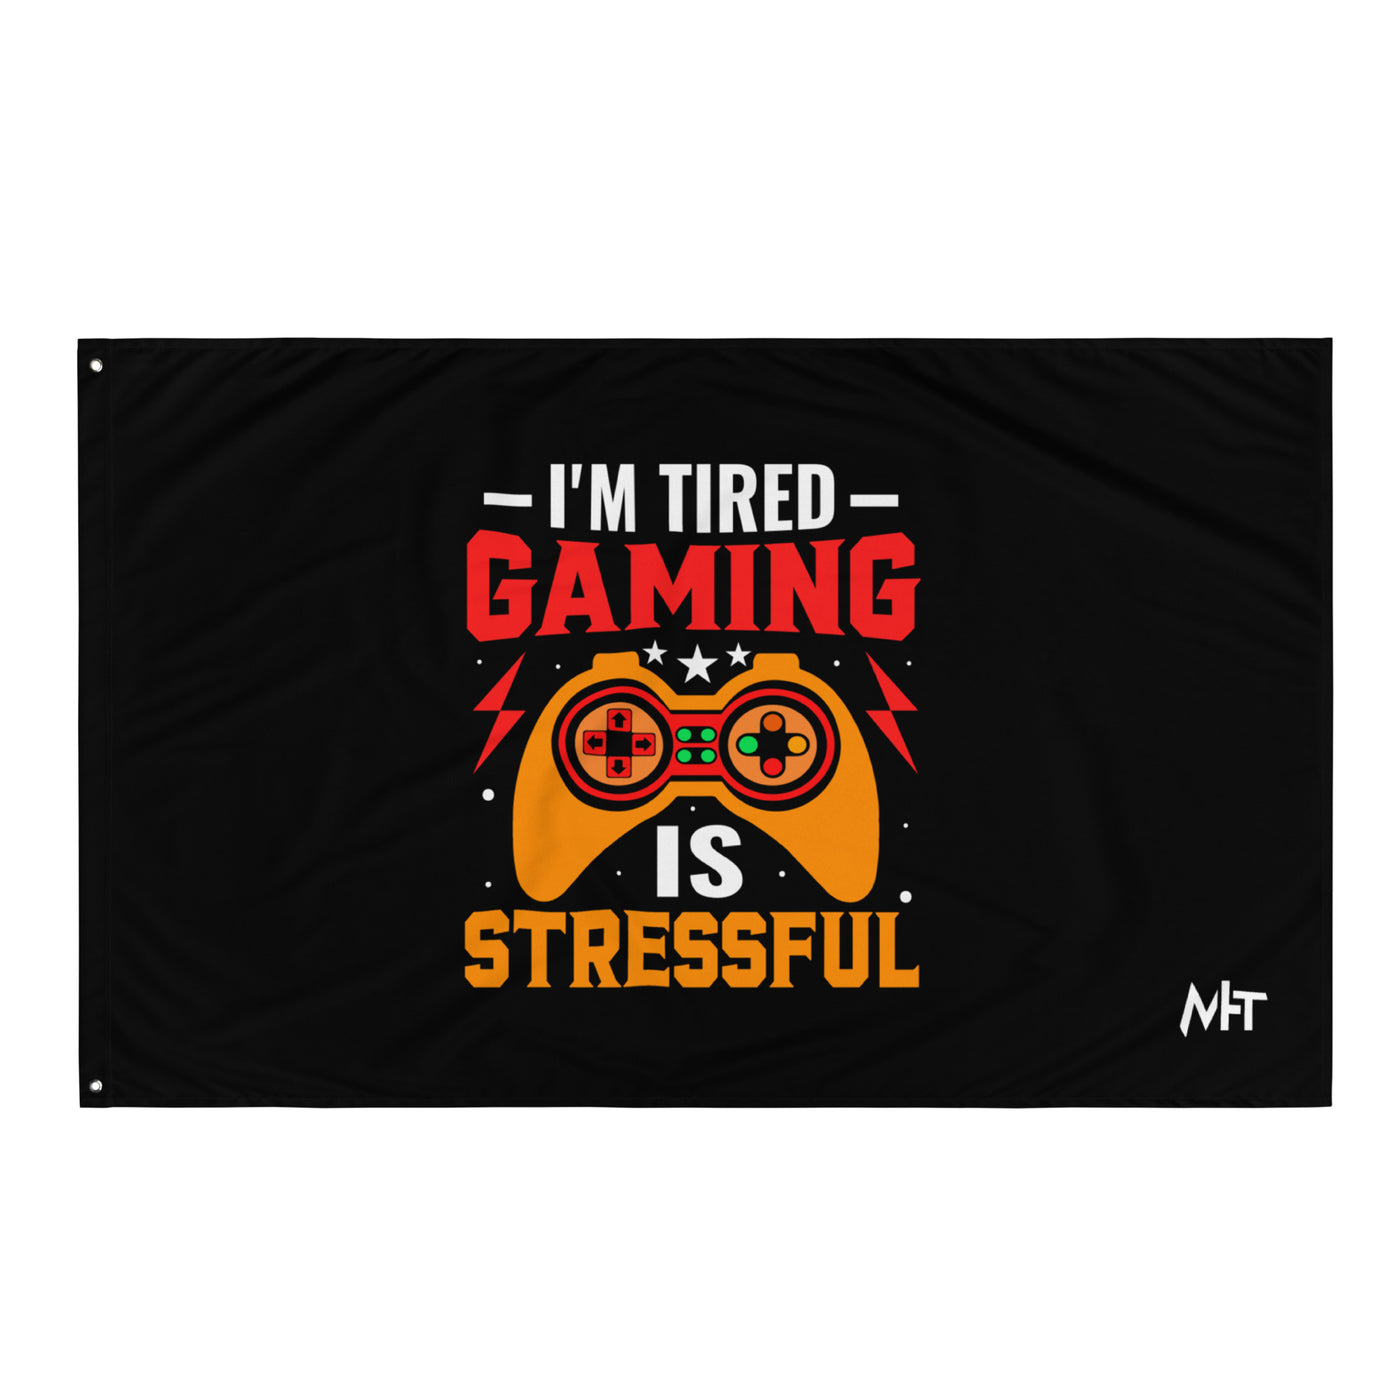 I'm Tired, Gaming is Stressful - Flag